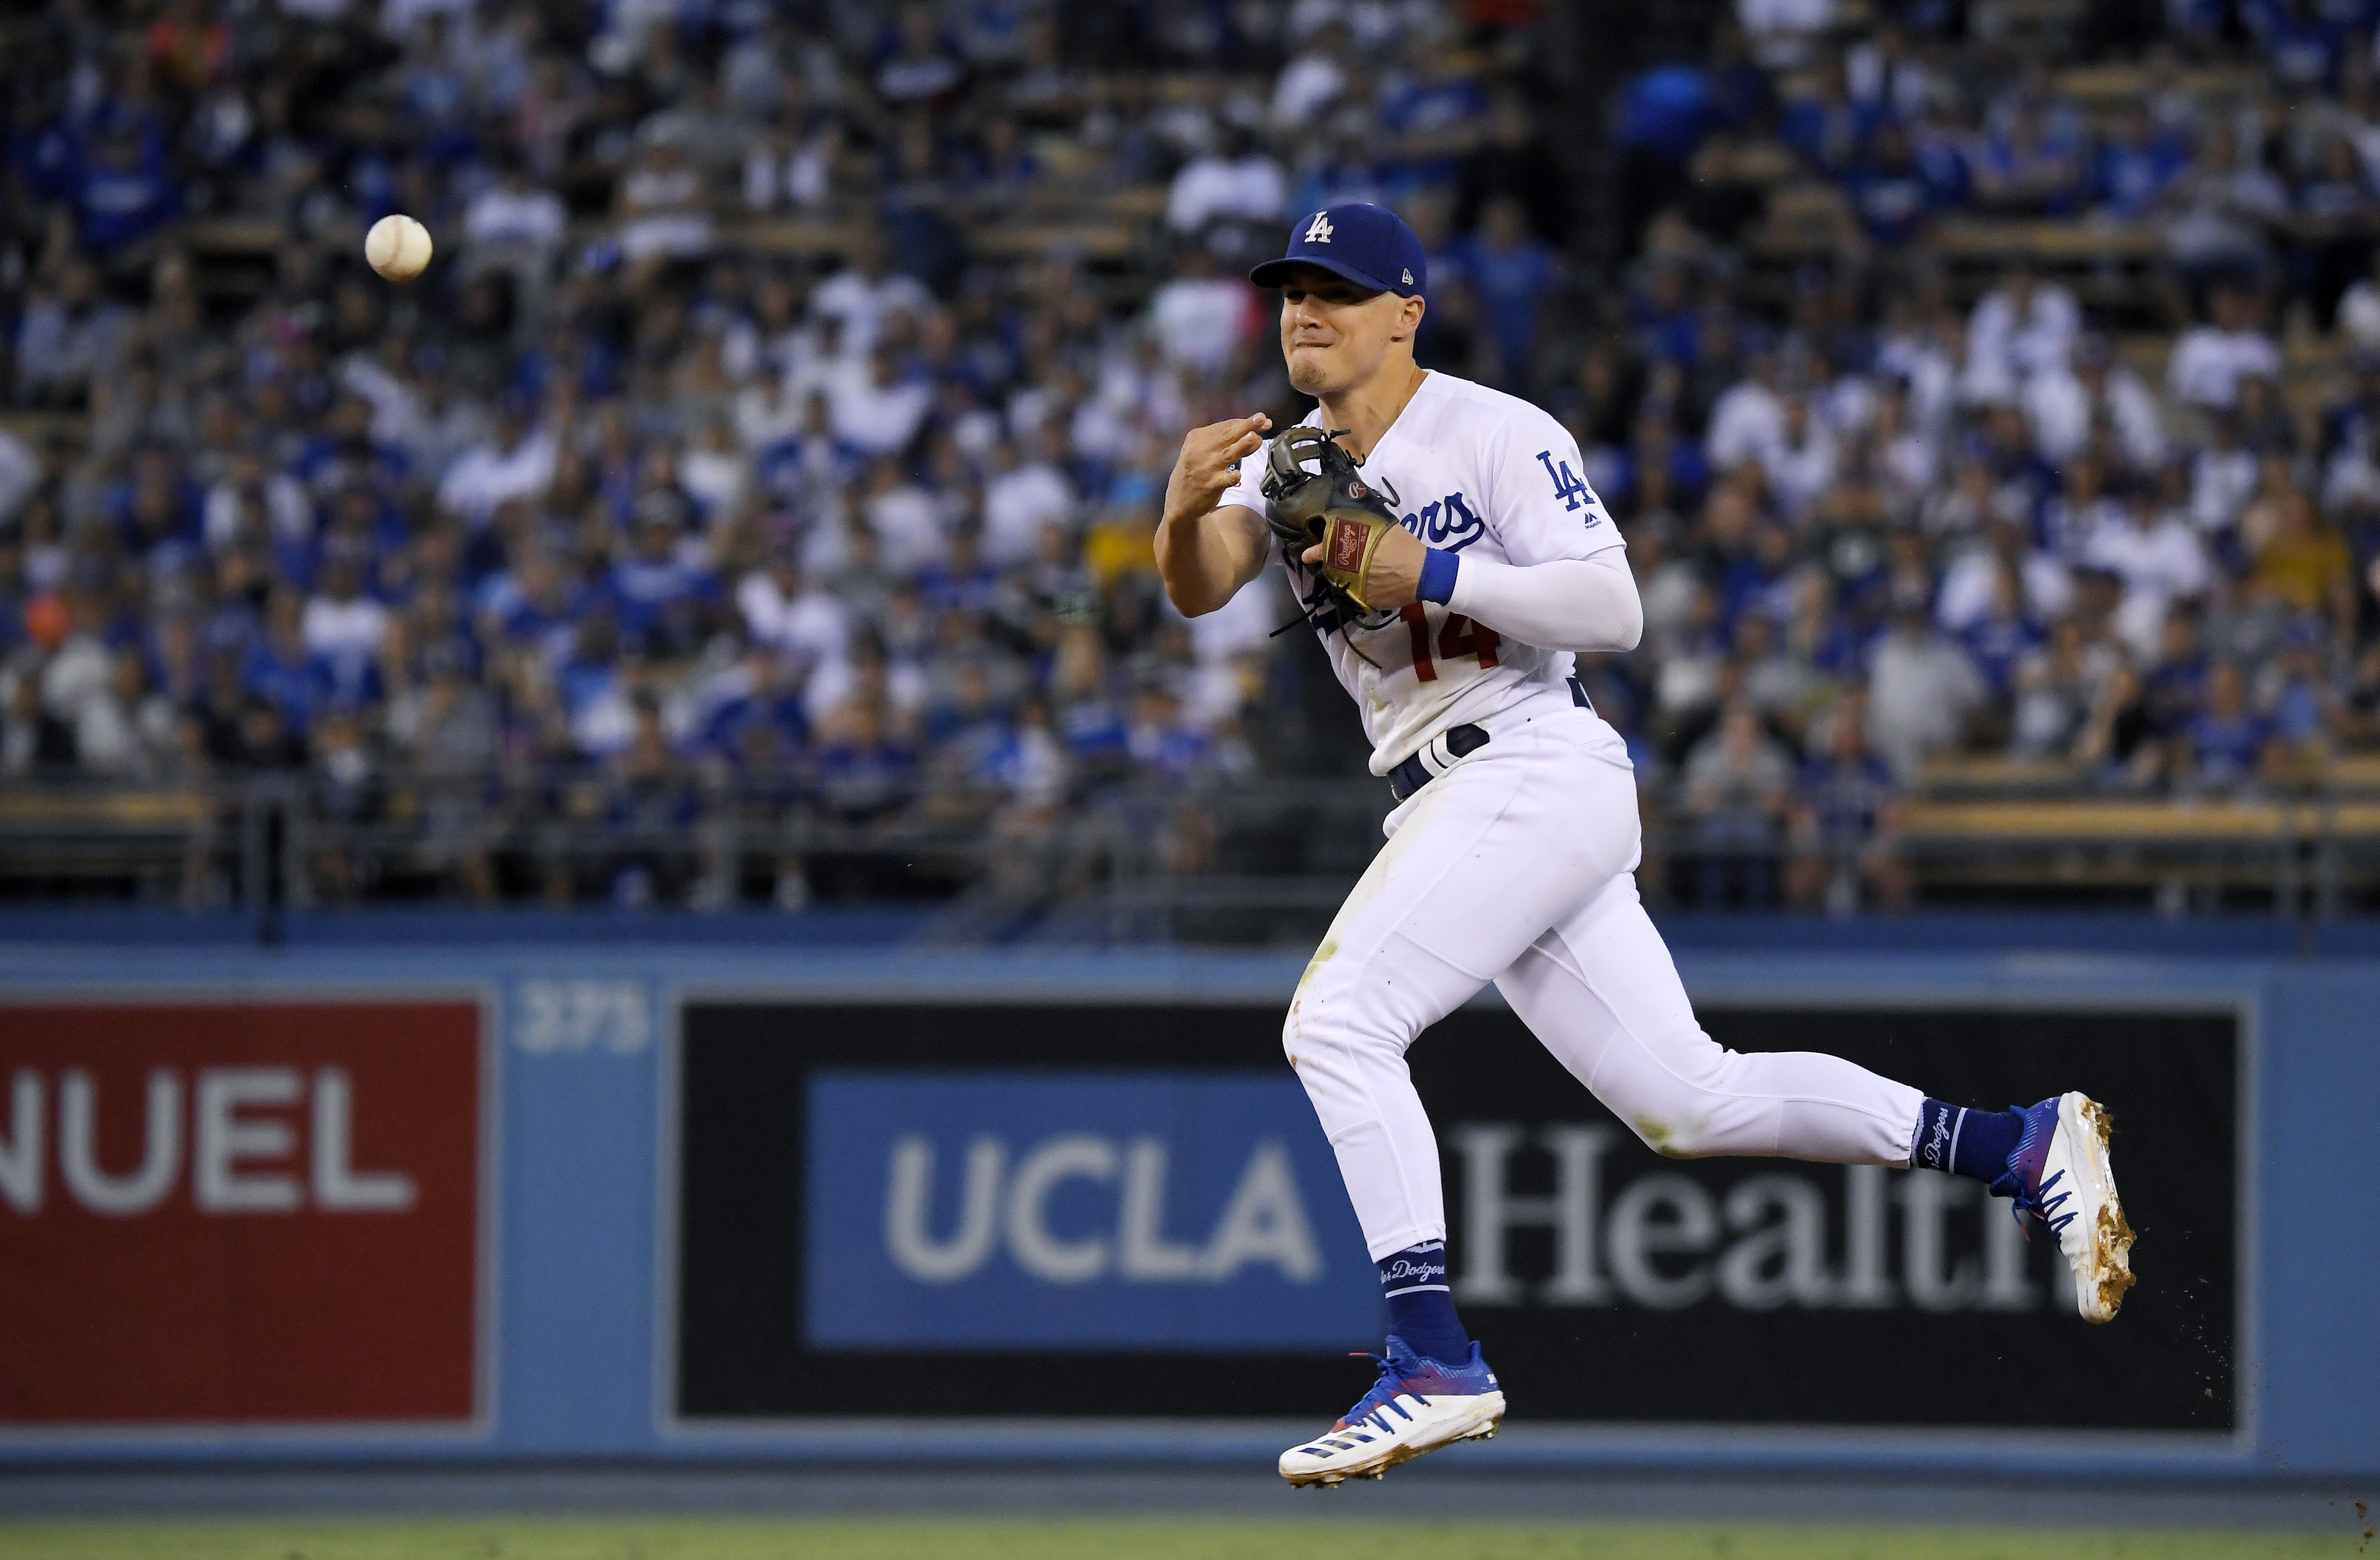 Hernandez single in 9th lifts Dodgers over Blue Jays 3-2